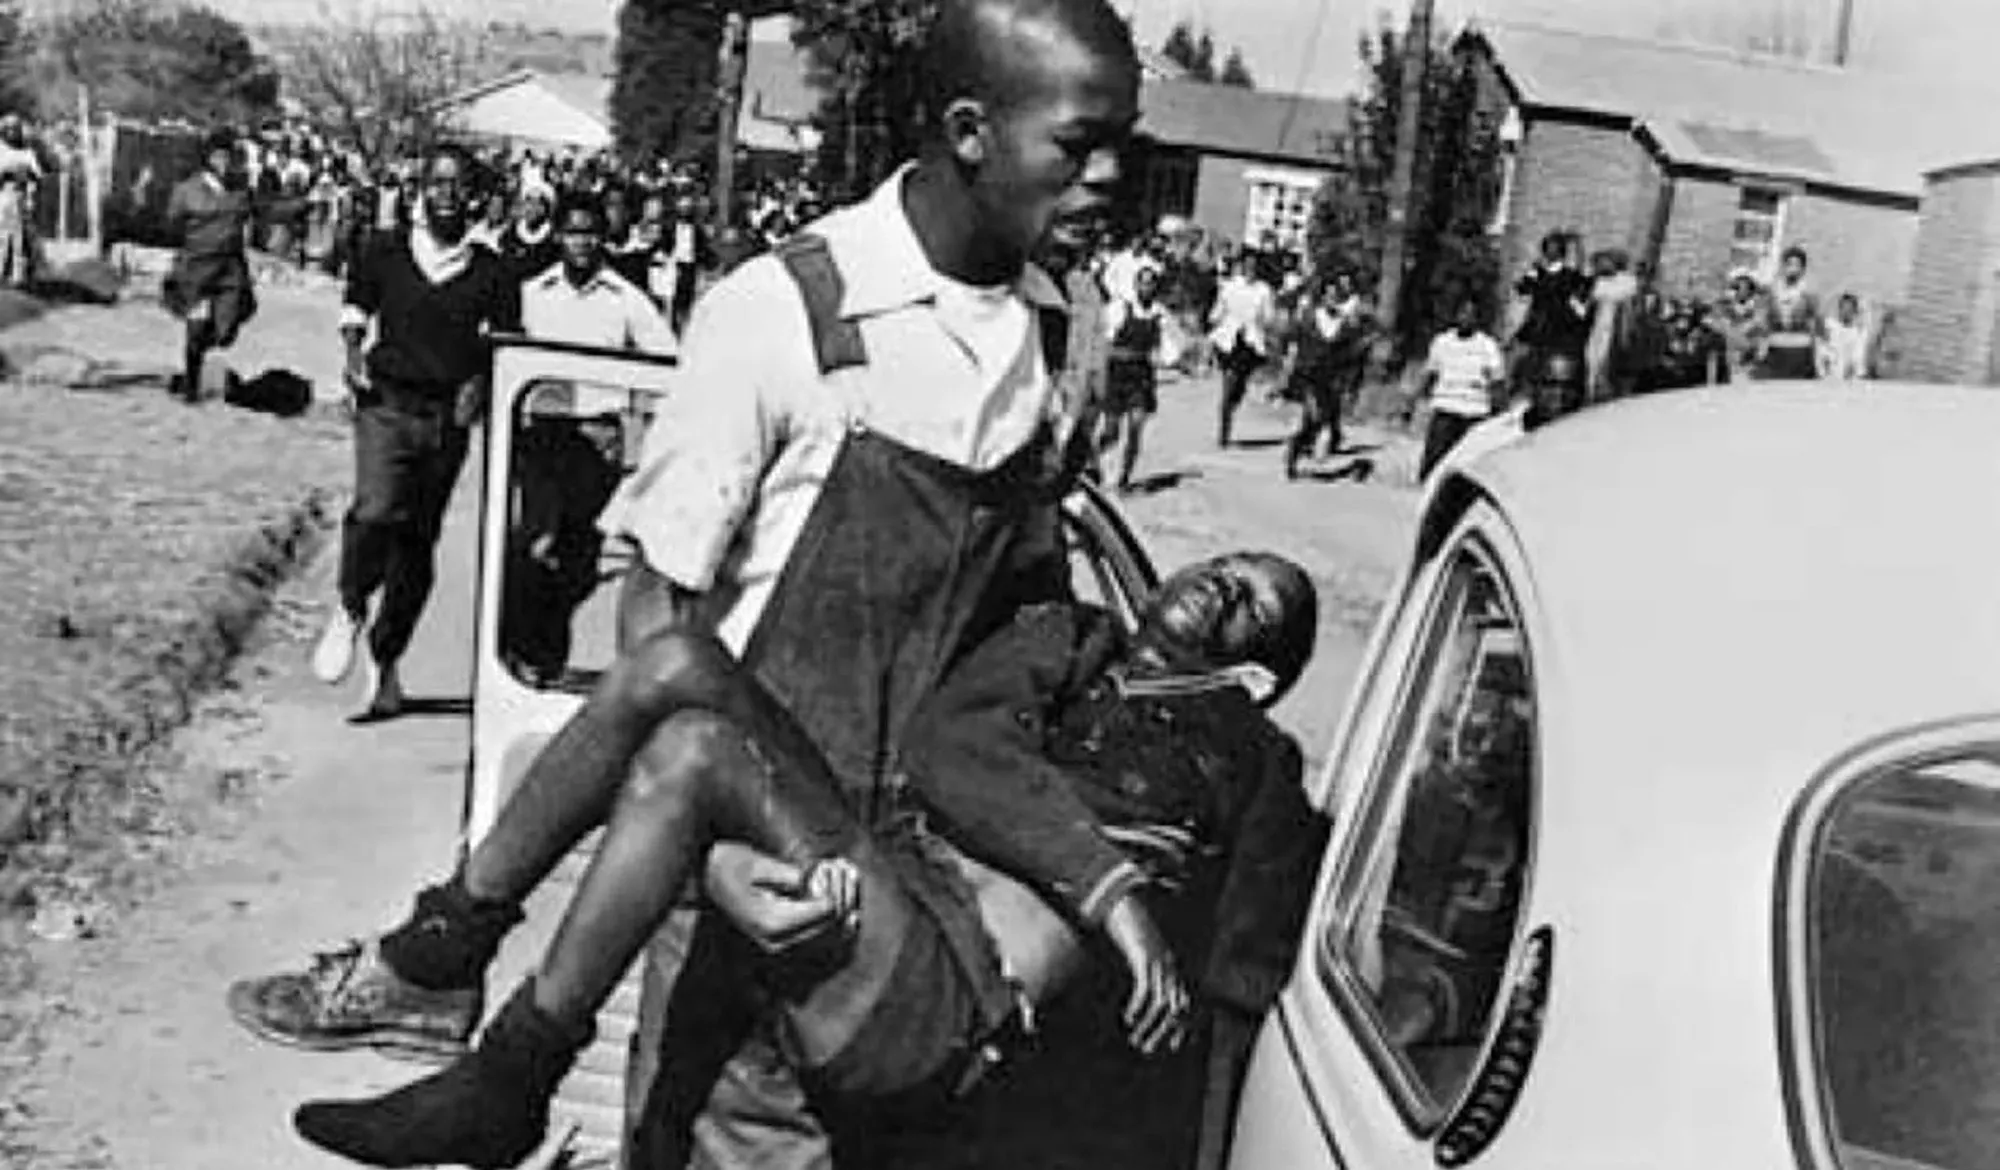 Hector Pieterson in the arms of Mbuyisa Makhubu in Soweto on 16 June 1976